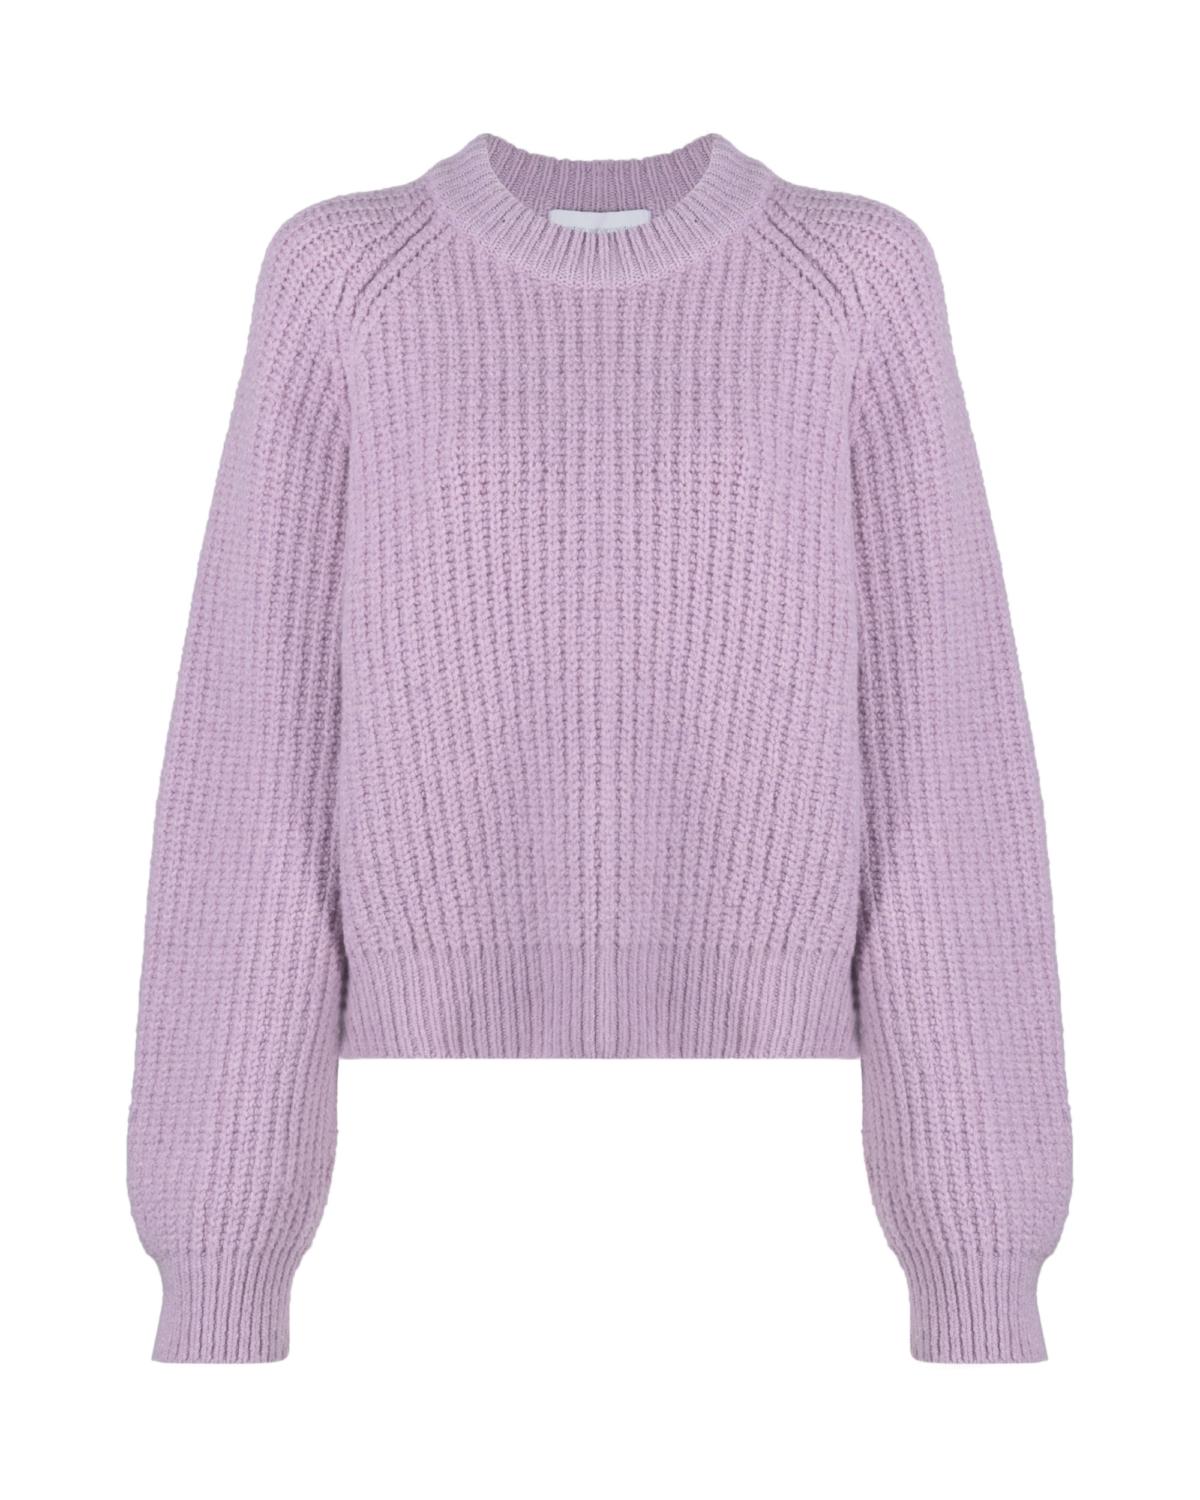 Lilac Trend 2021: Light Purple Clothing to Wear This Fall - FASHION ...